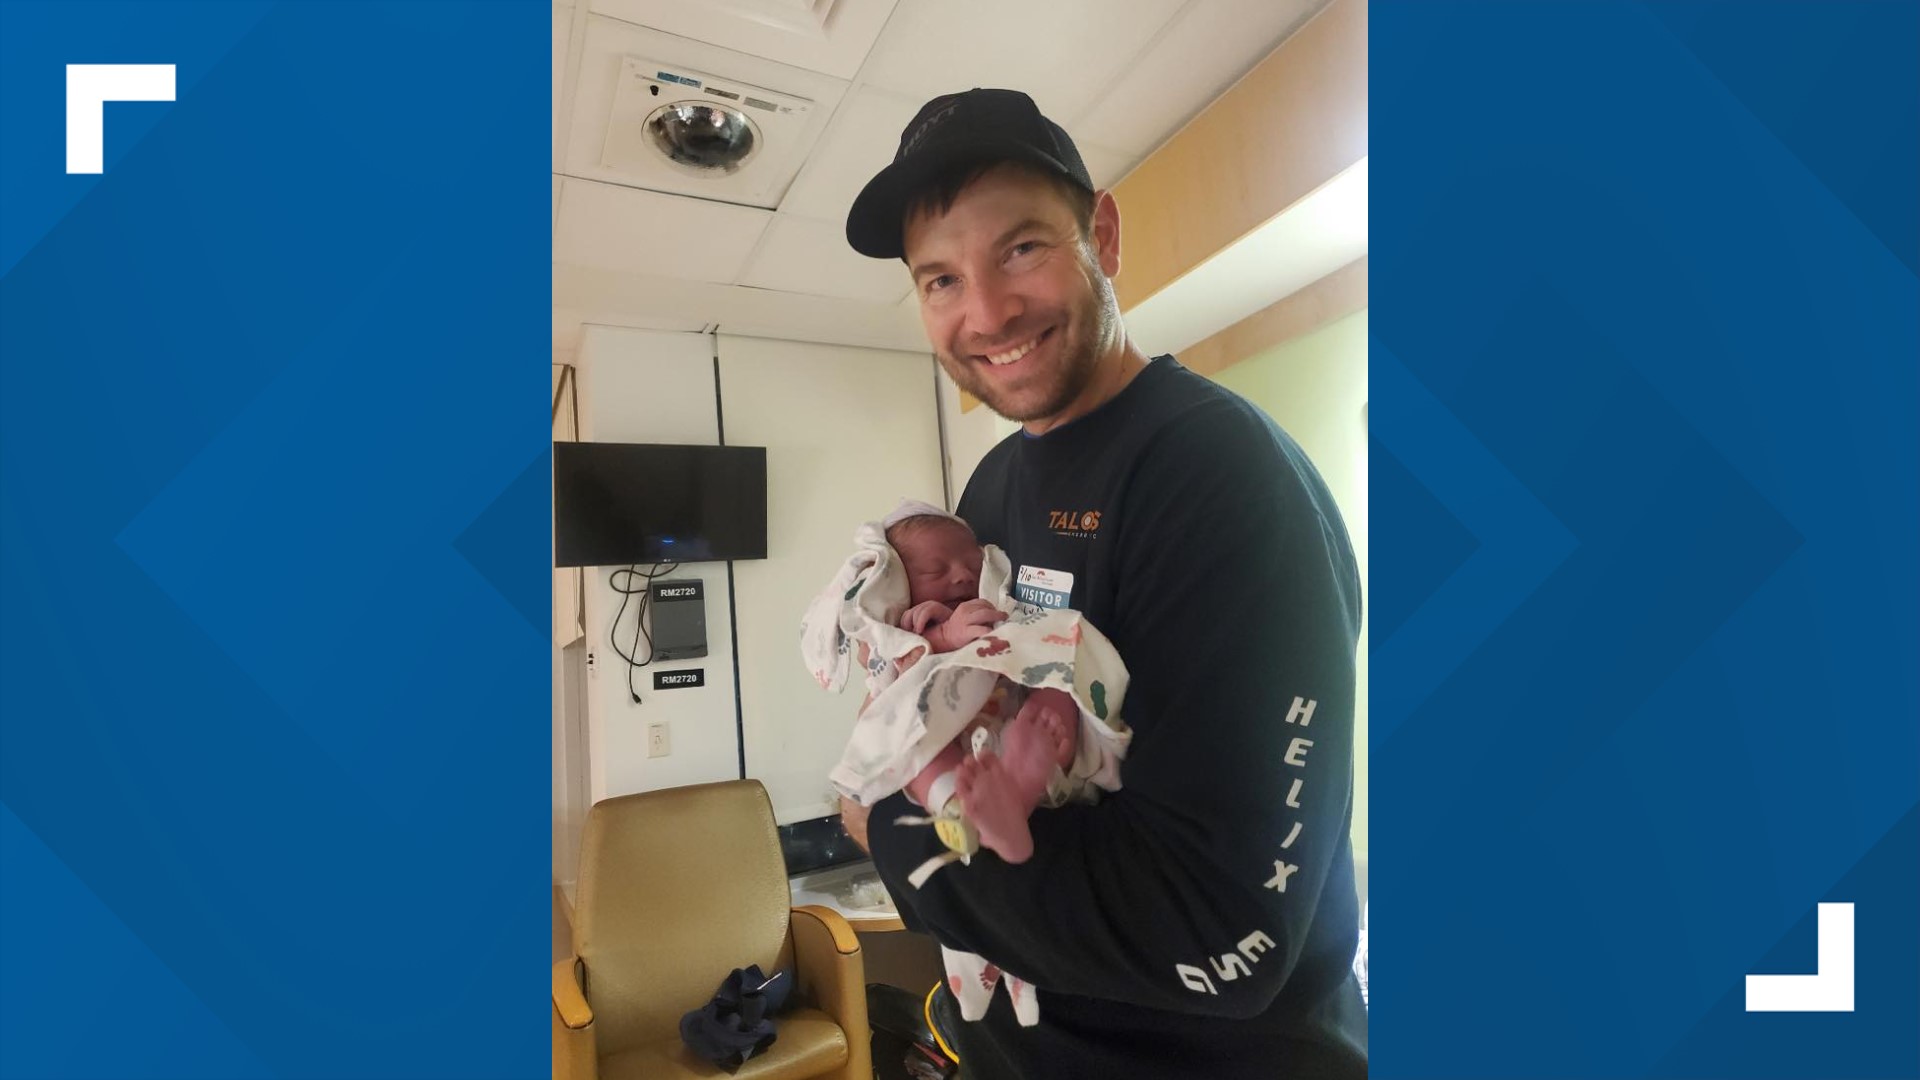 Emily and Ryan Burkhart expected their son to arrive in late February, but Weston Wayne Burkhart had other plans — so, Ryan scrambled to get back to Maine from work.